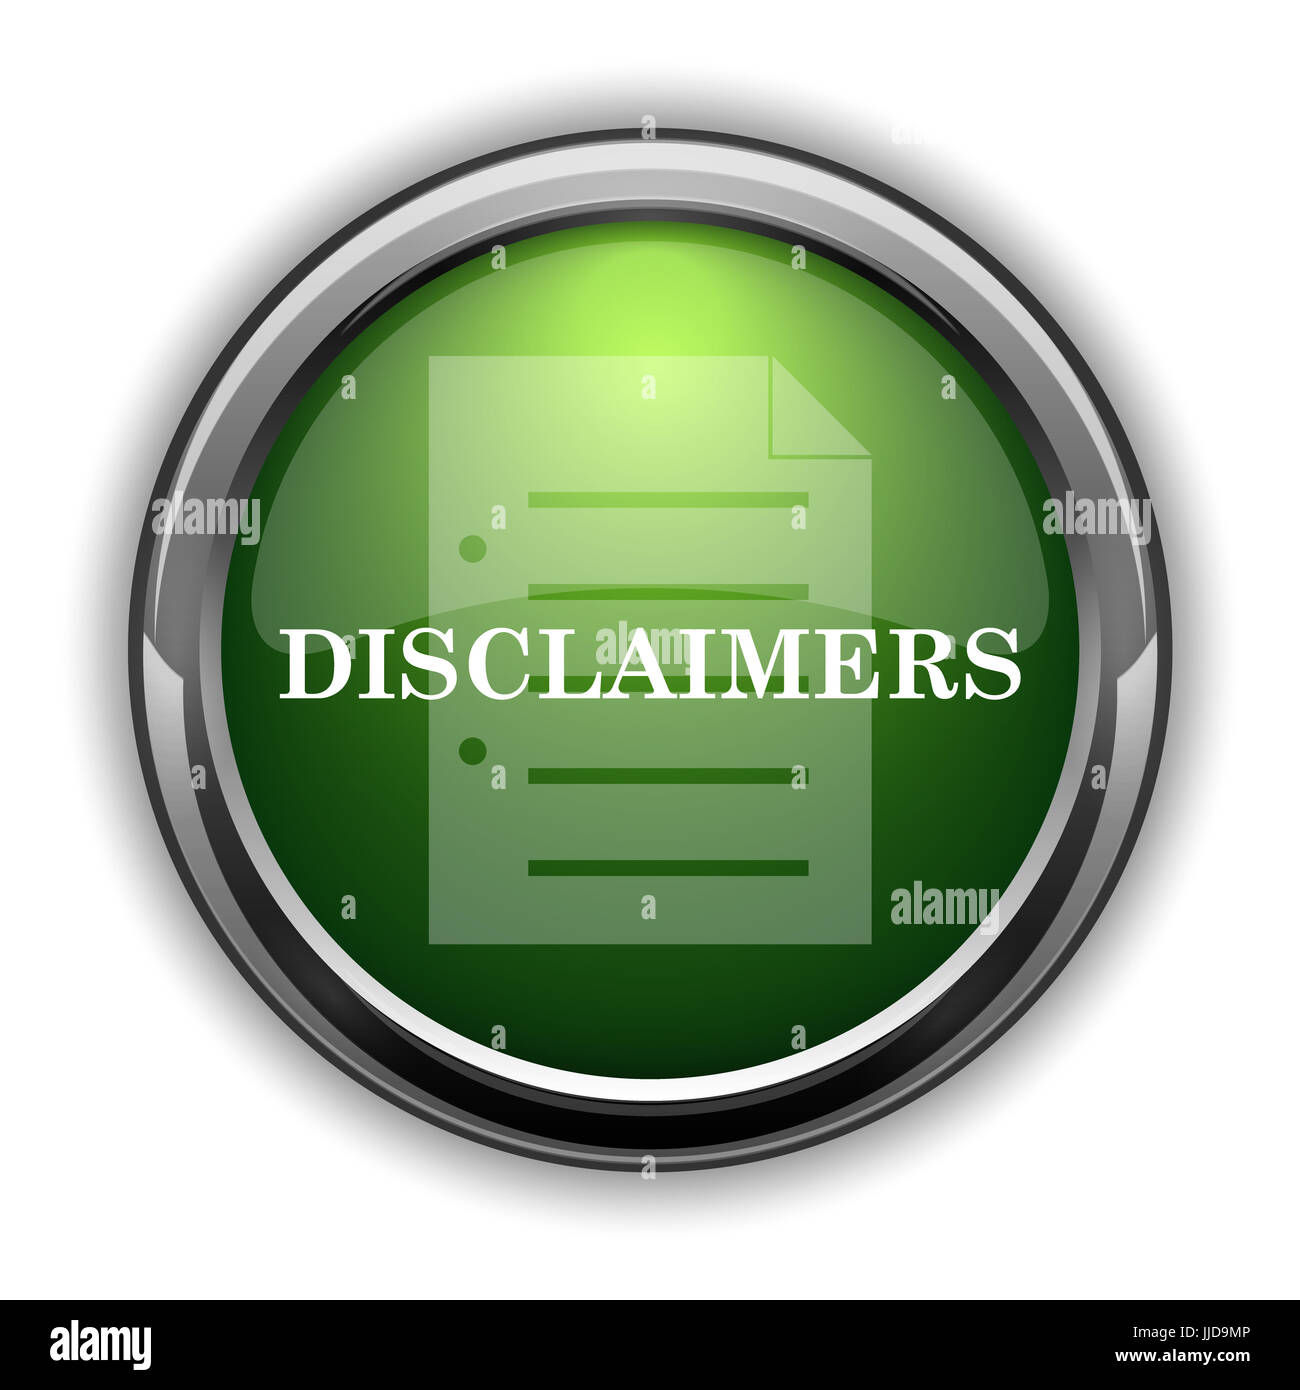 Disclaimers icon. Disclaimers website button on white background Stock Photo